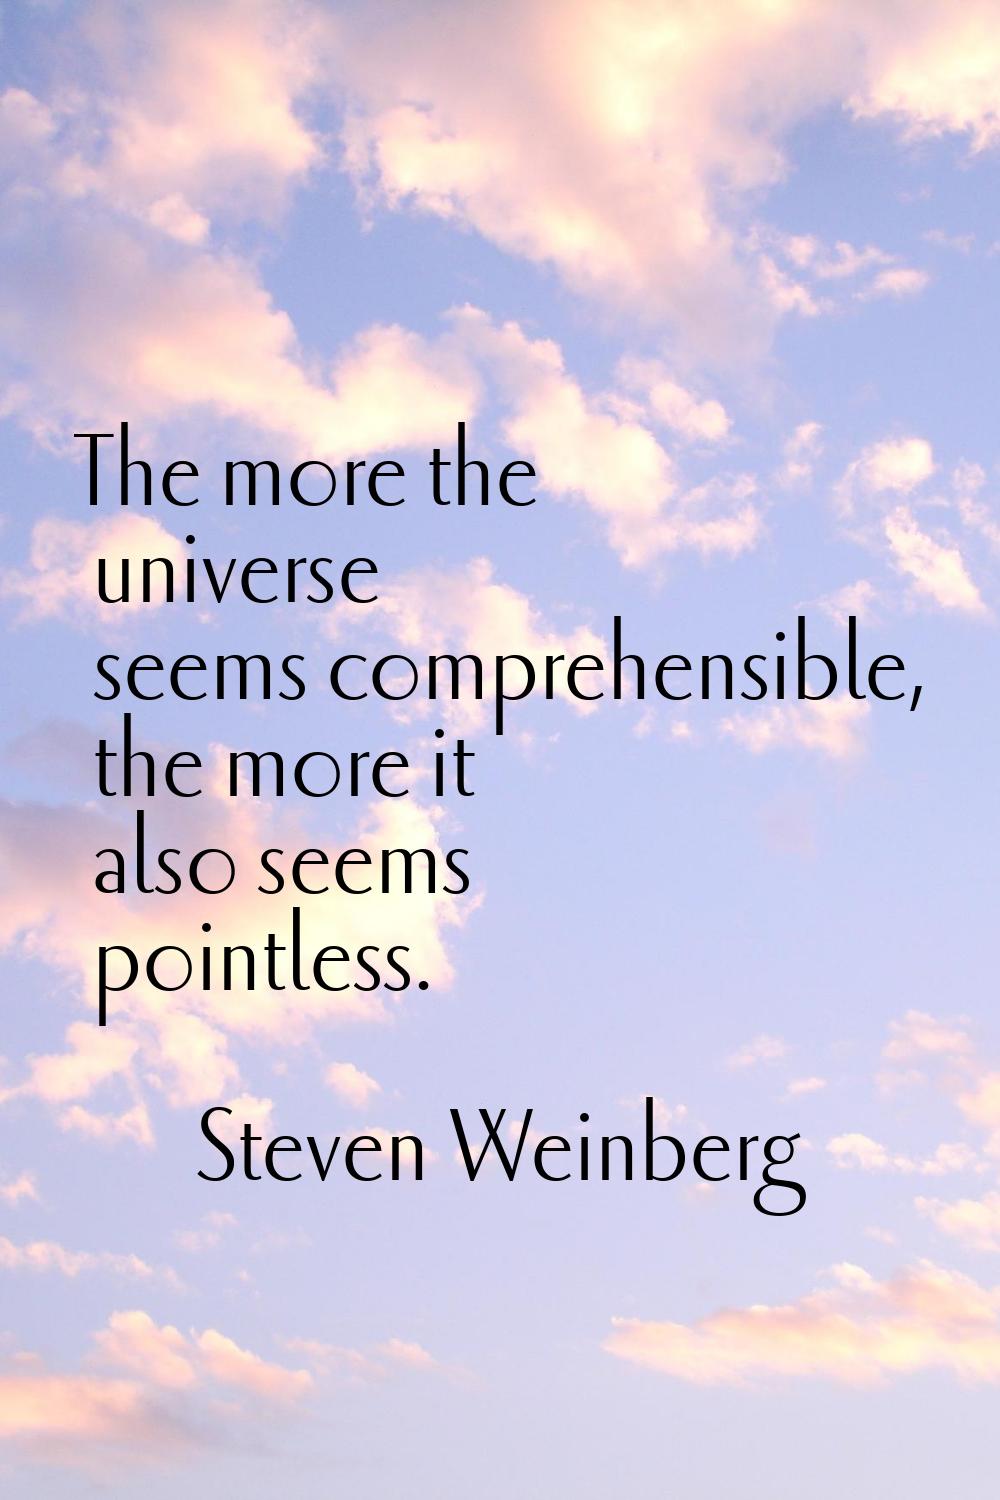 The more the universe seems comprehensible, the more it also seems pointless.